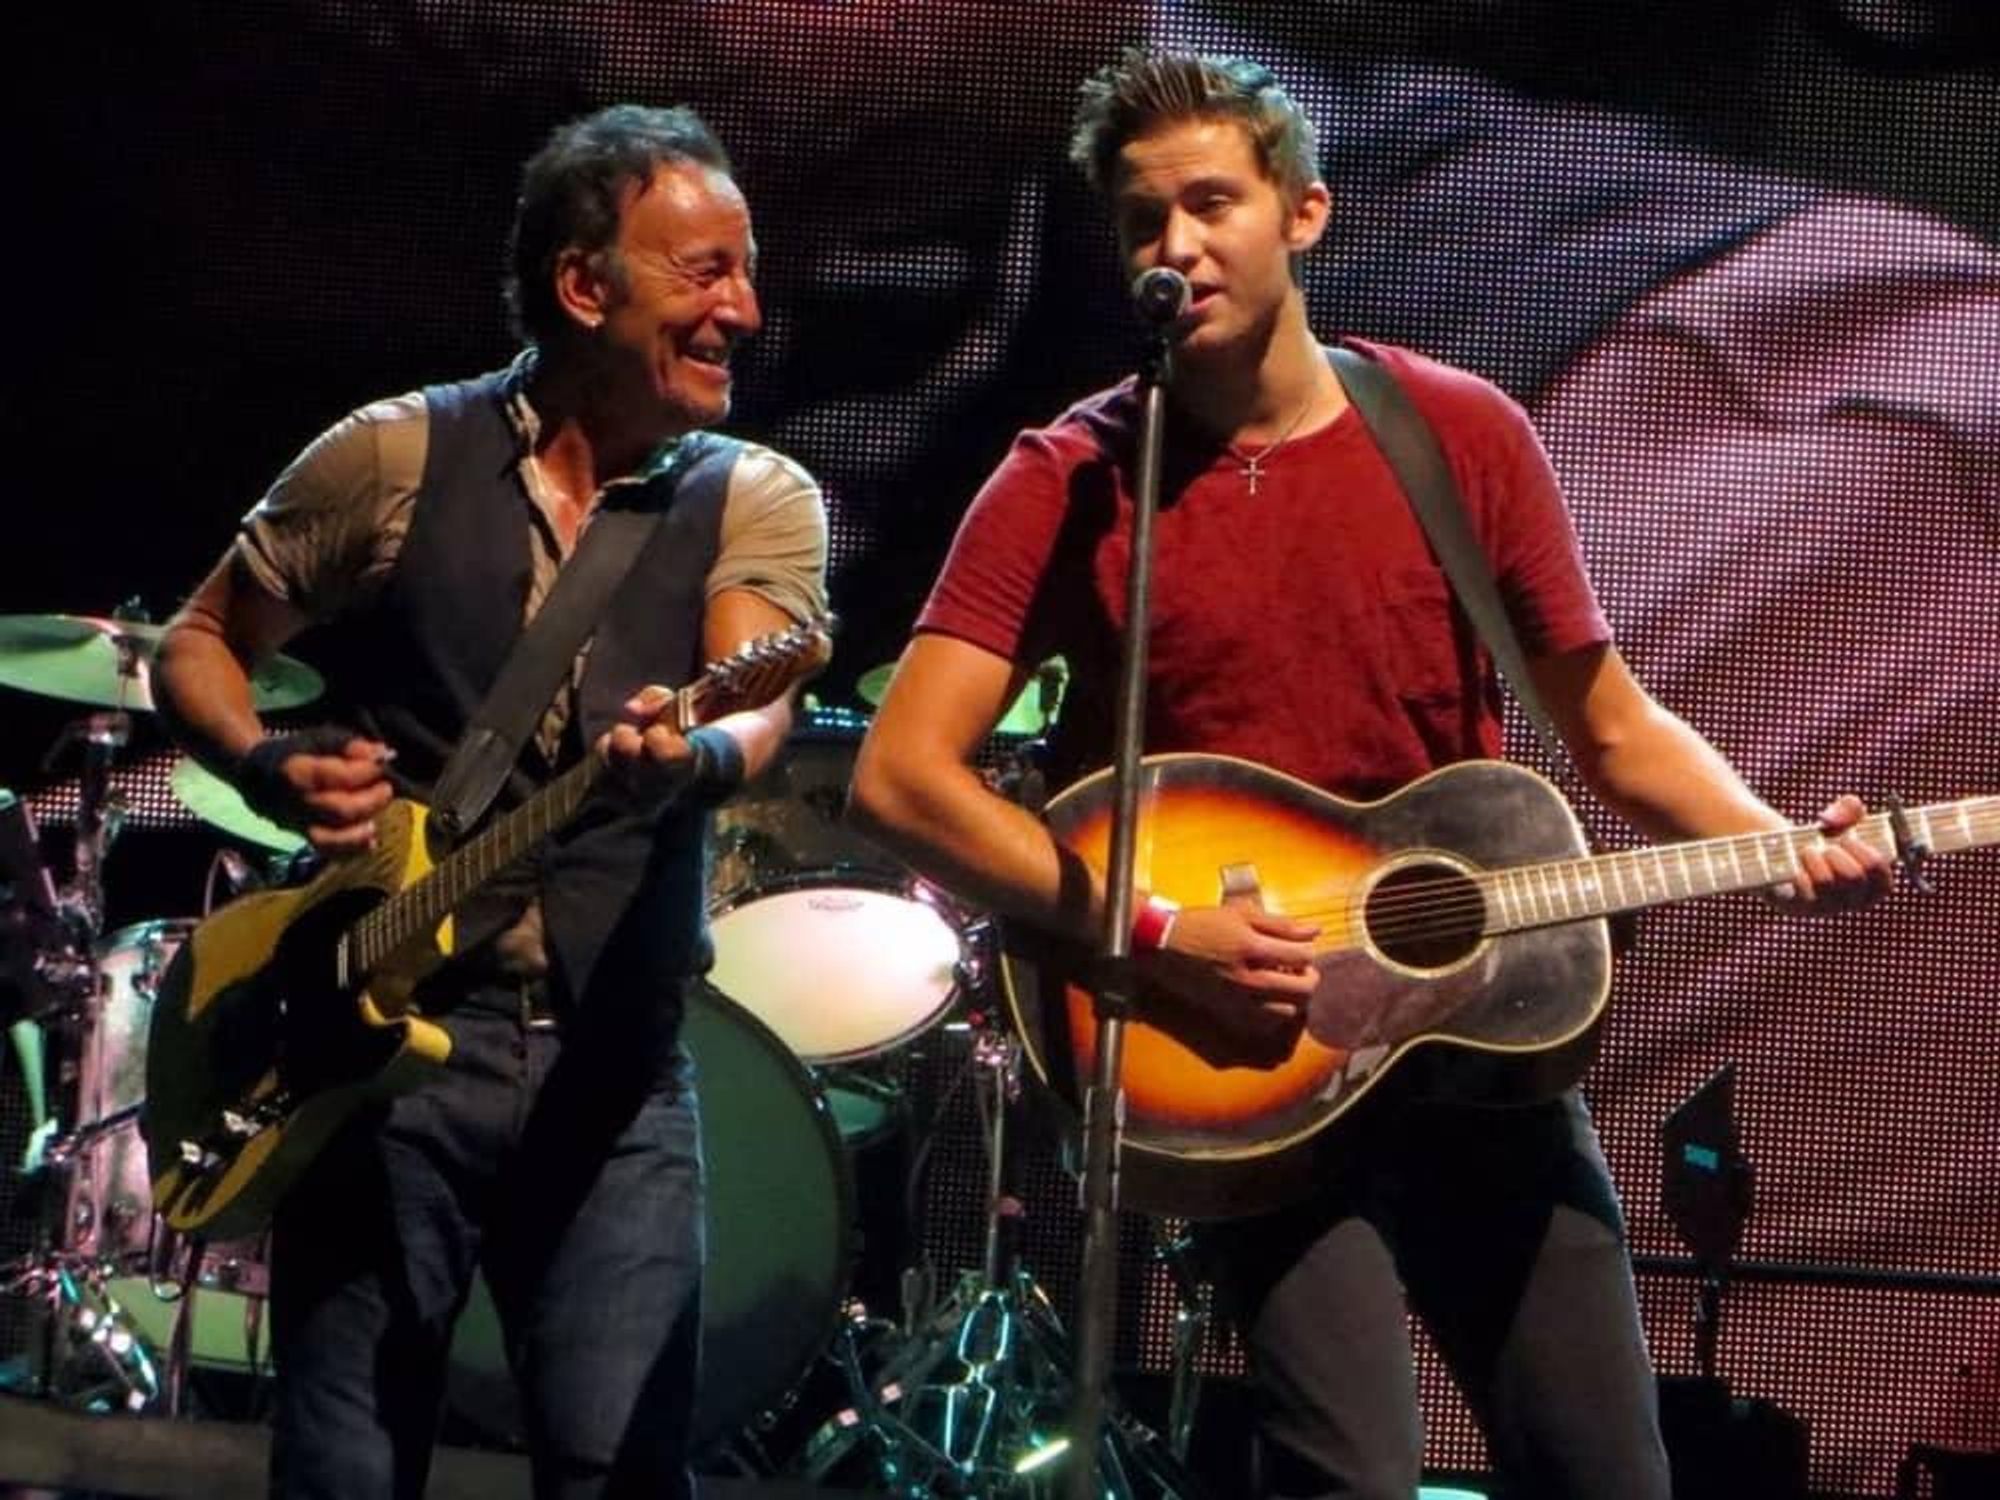 Bruce Springsteen's Children Don't Know His Music